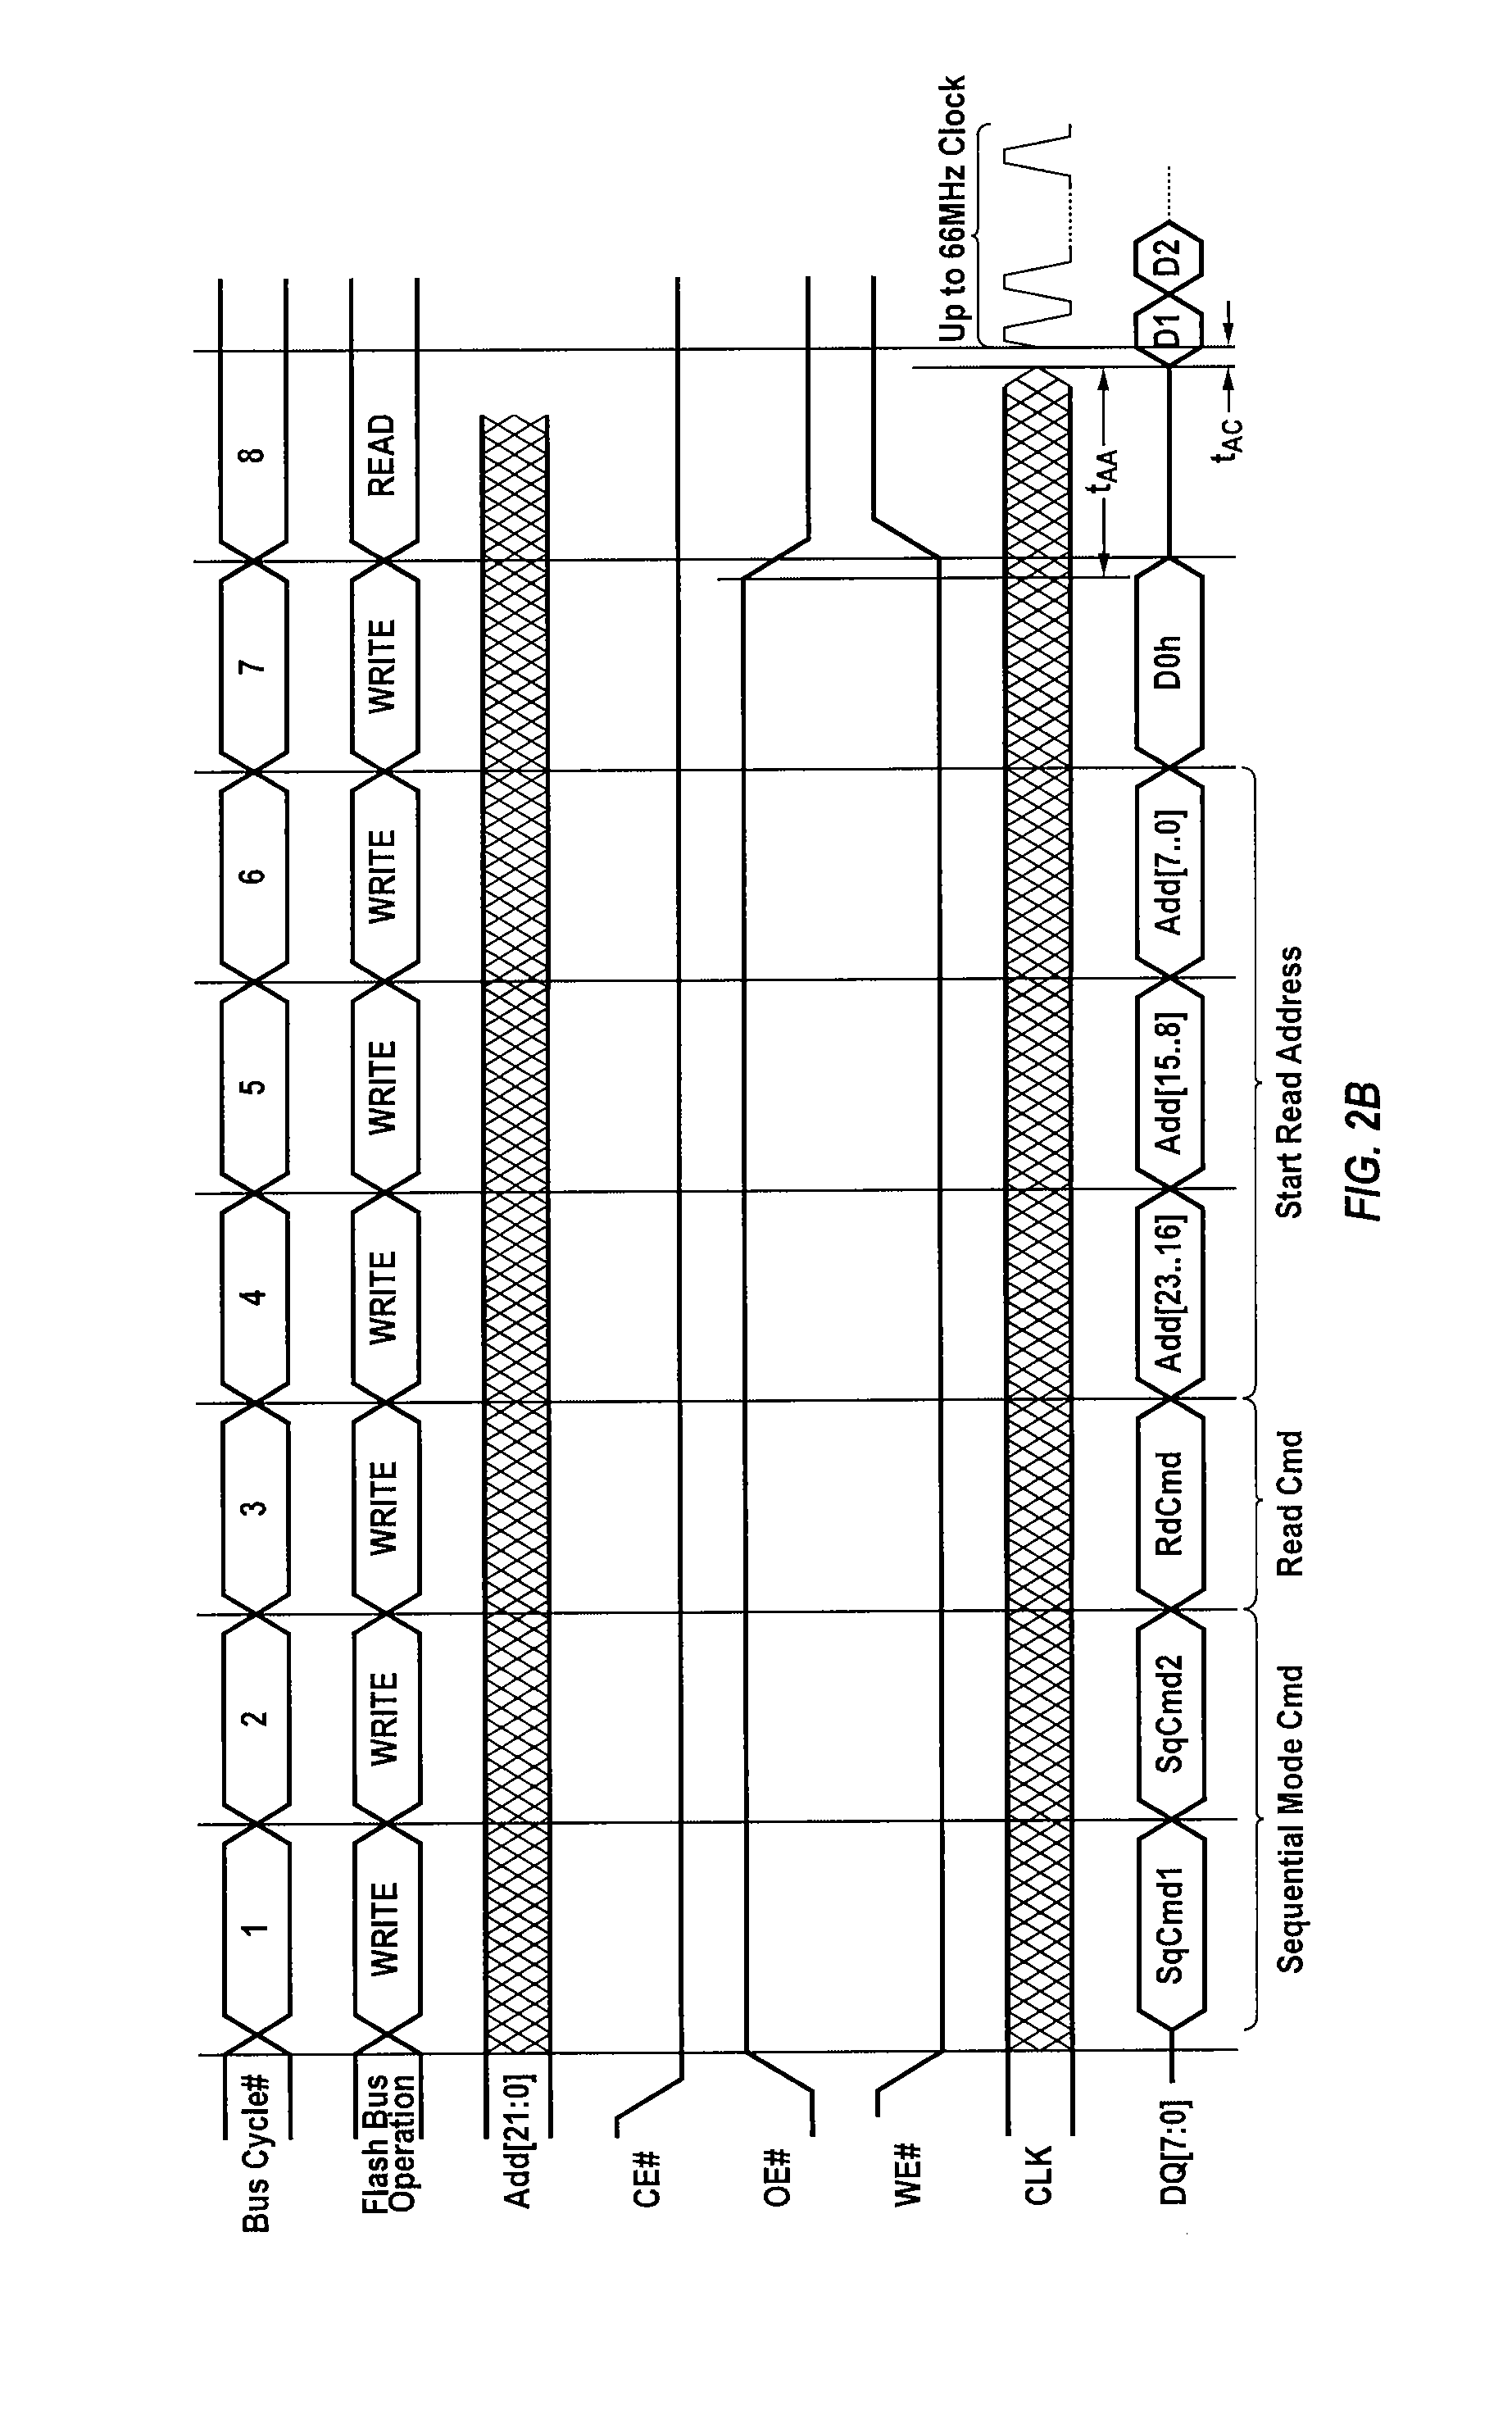 Techniques for sequentially transferring data from a memory device through a parallel interface